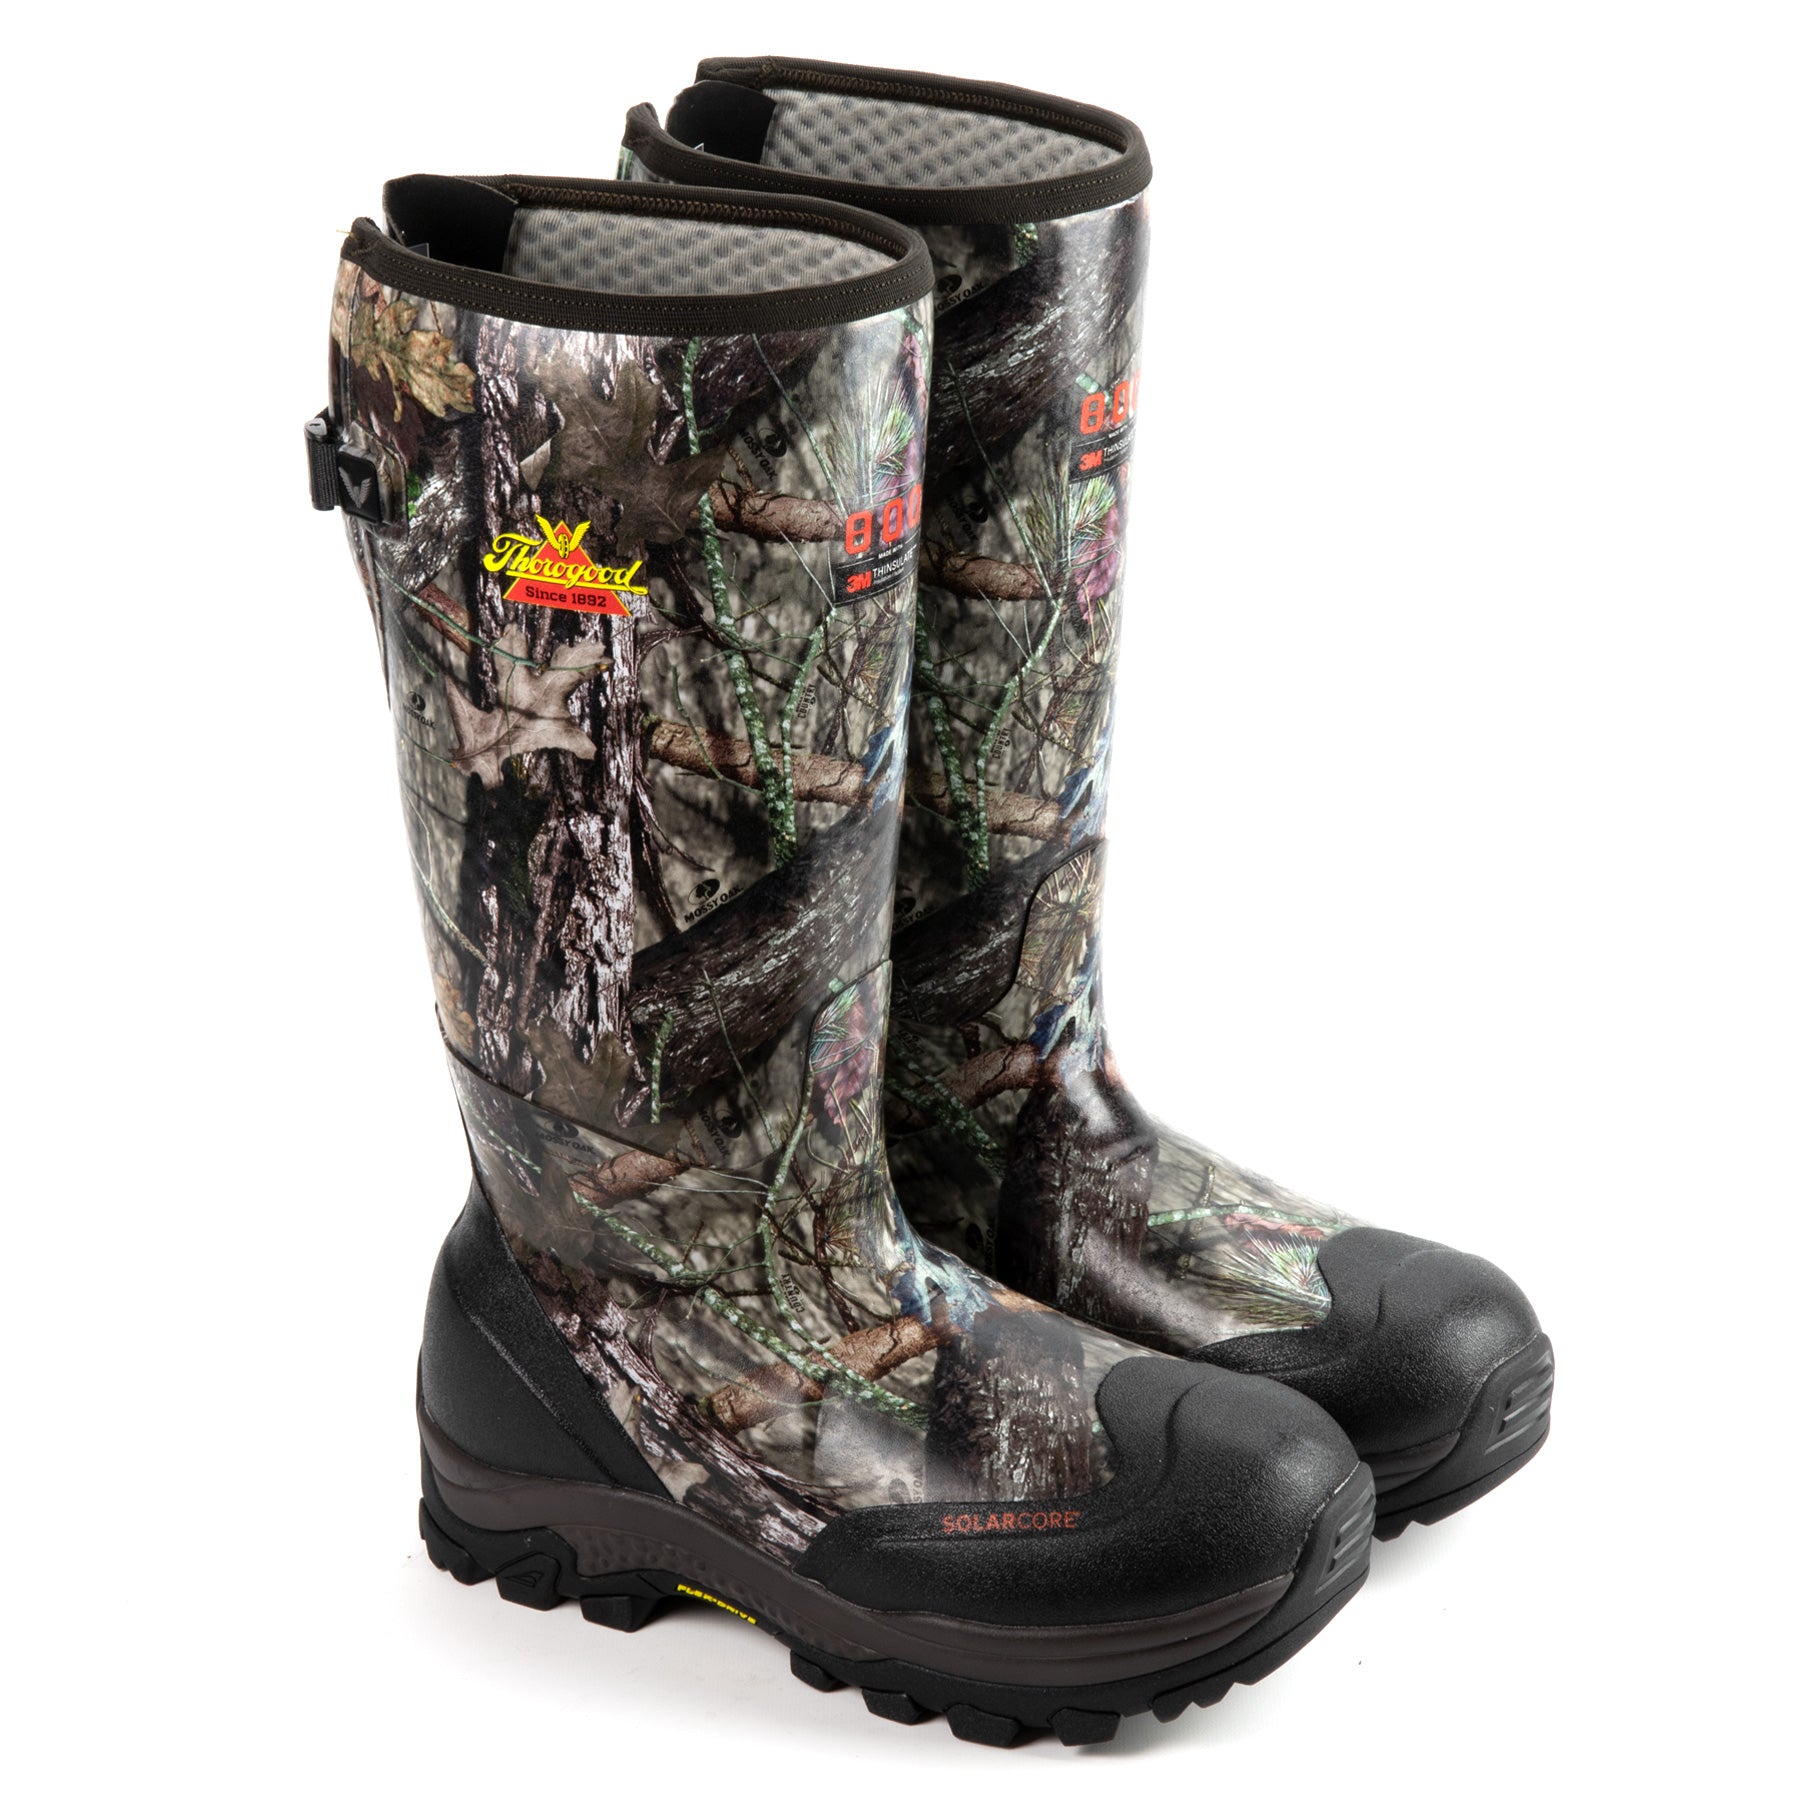 Infinity FD 17" Waterproof 800g Rubber Work Boot in Mossy Oak Break-up Country color from the side view